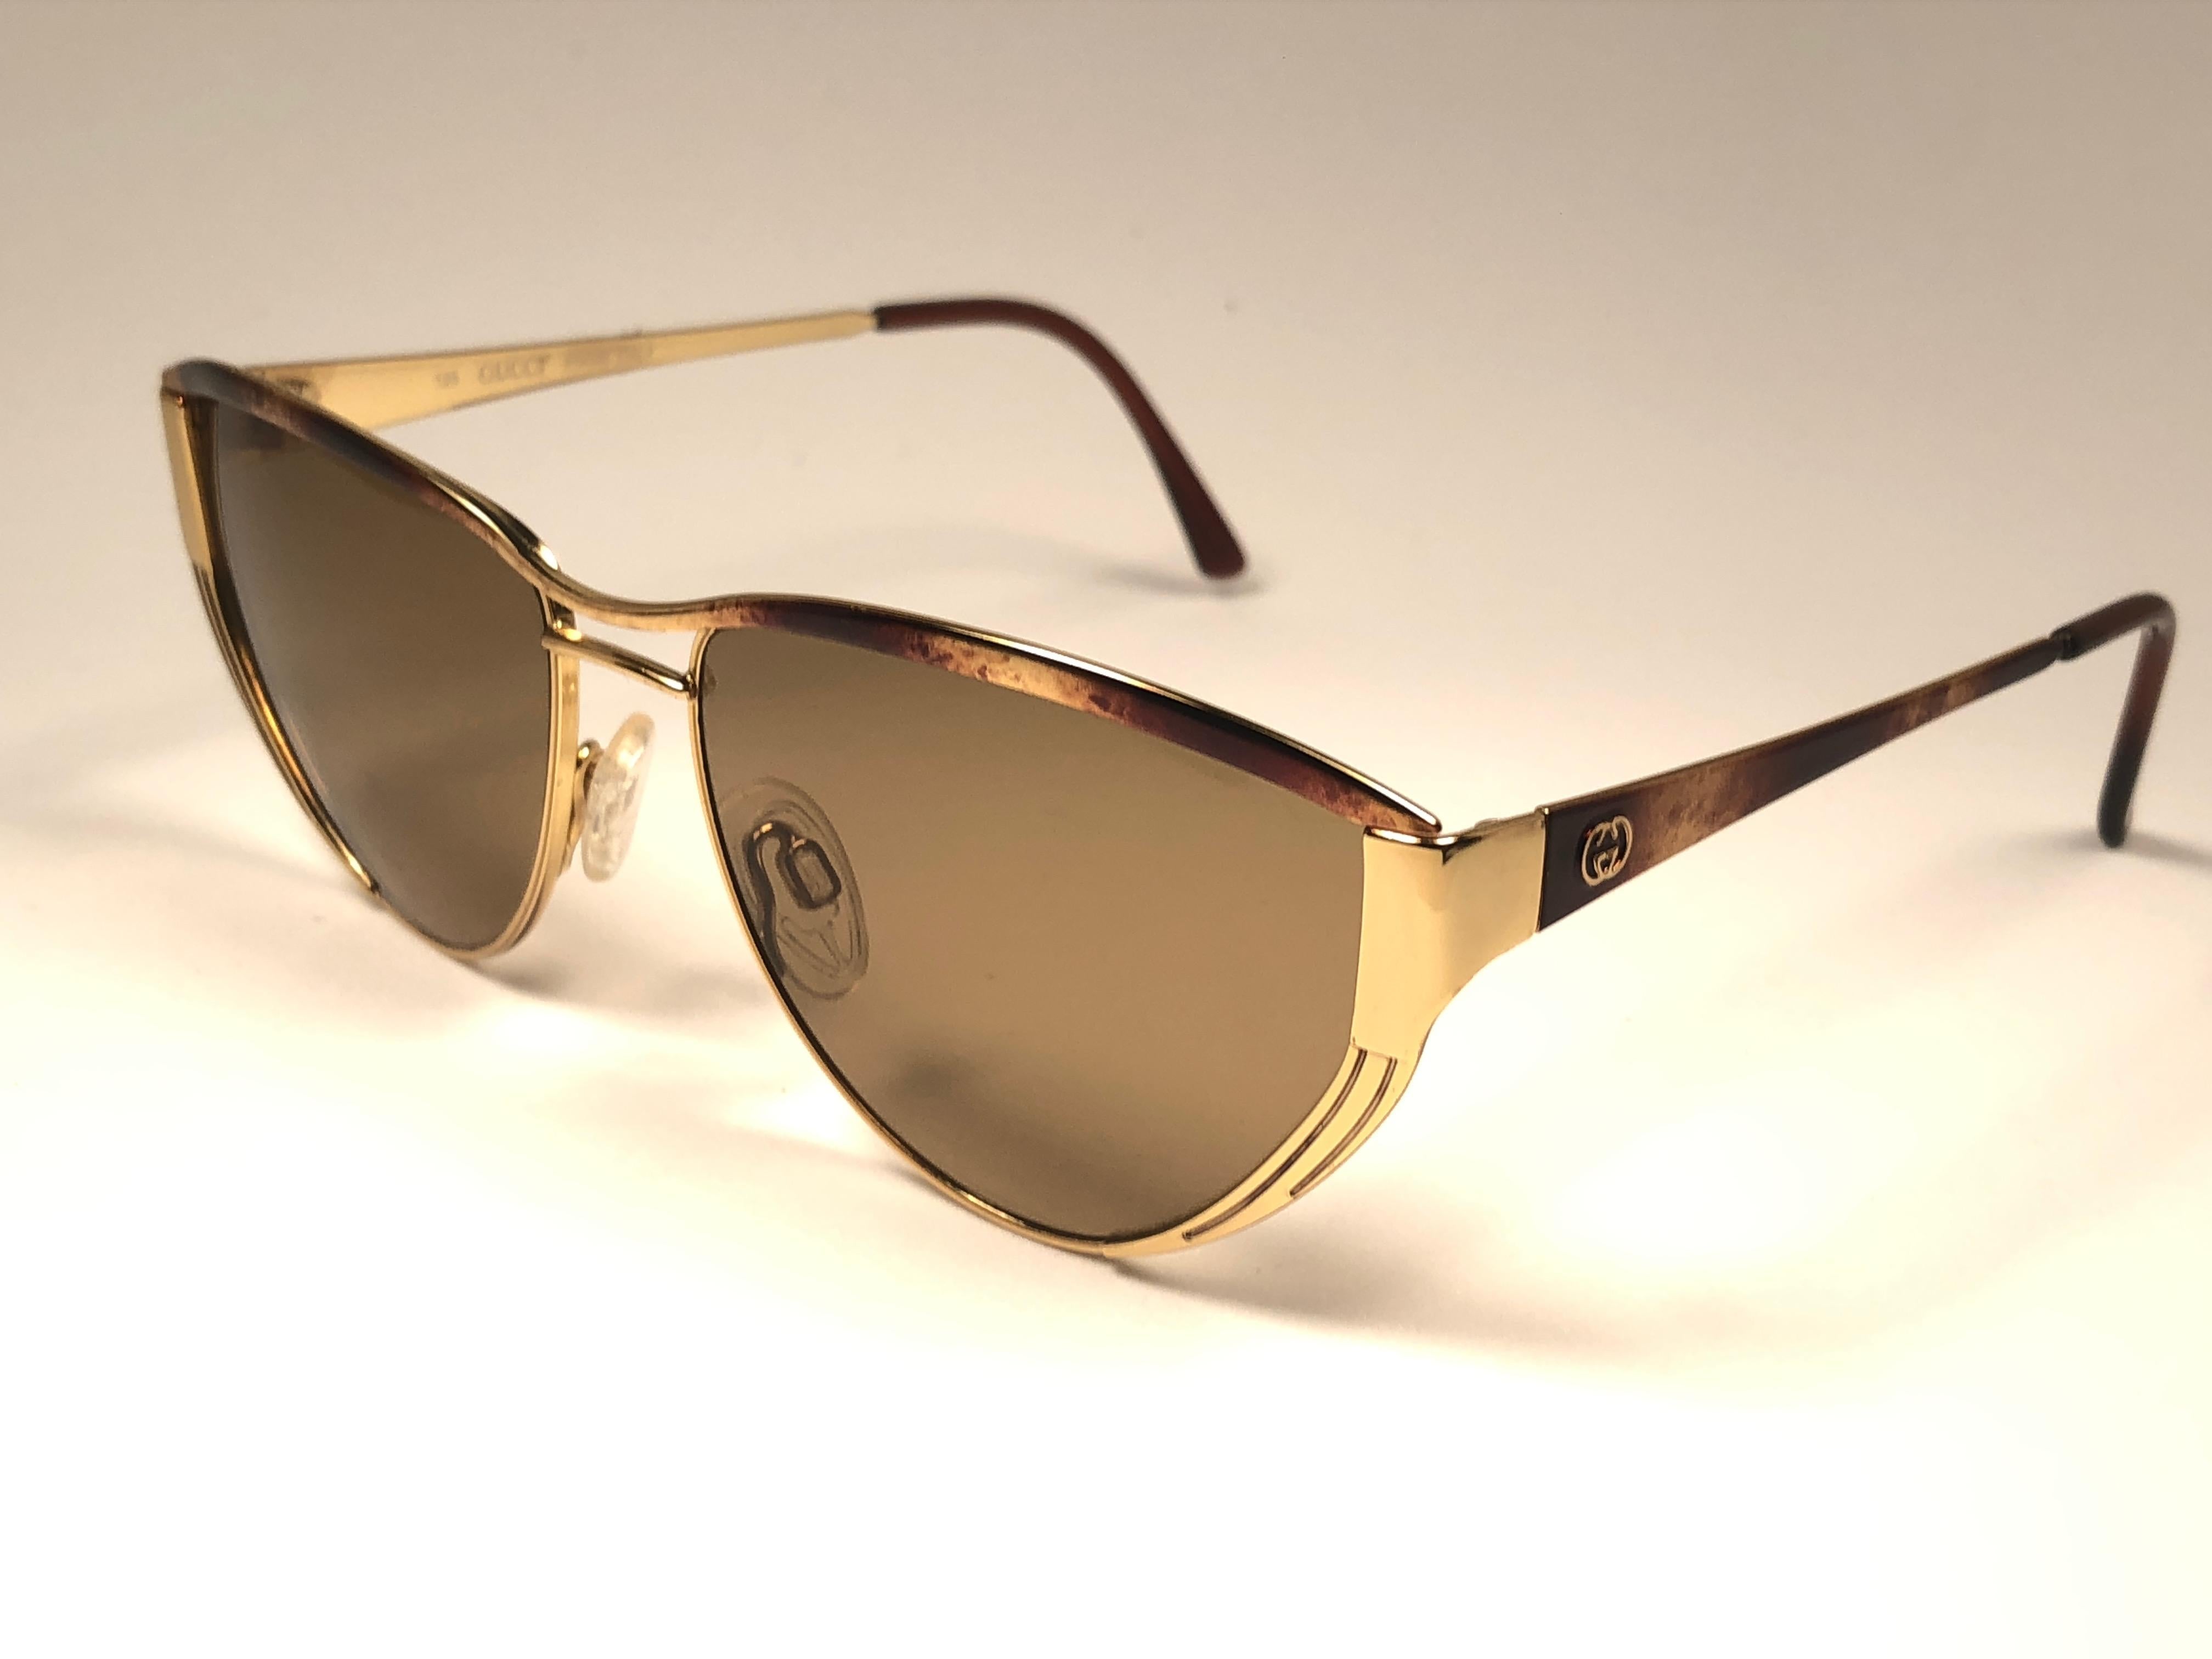 Brown New Vintage Gucci Tortortoise & Gold Sunglasses 1980's Made in Italy